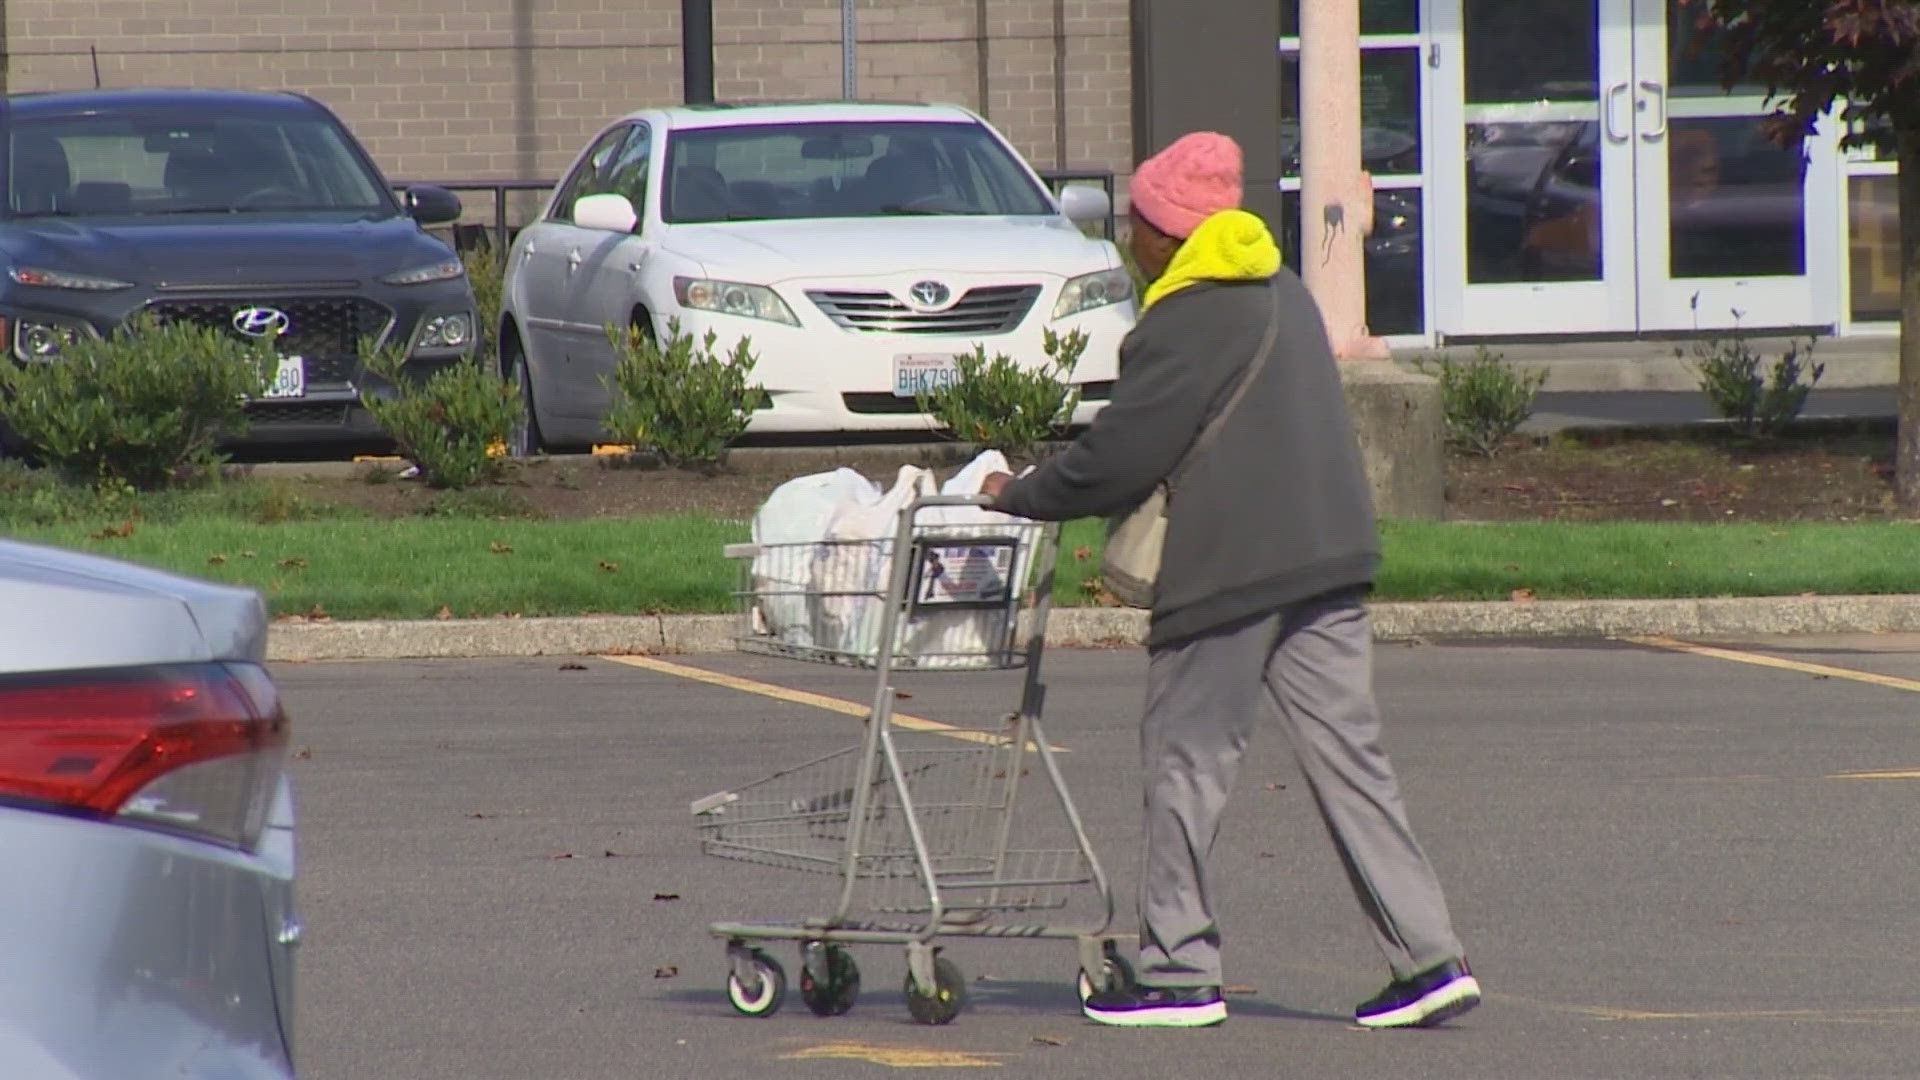 The thefts happened at Fred Meyer and Winco parking lots in Federal Way, the women were 76 and 86 years old, according to police.